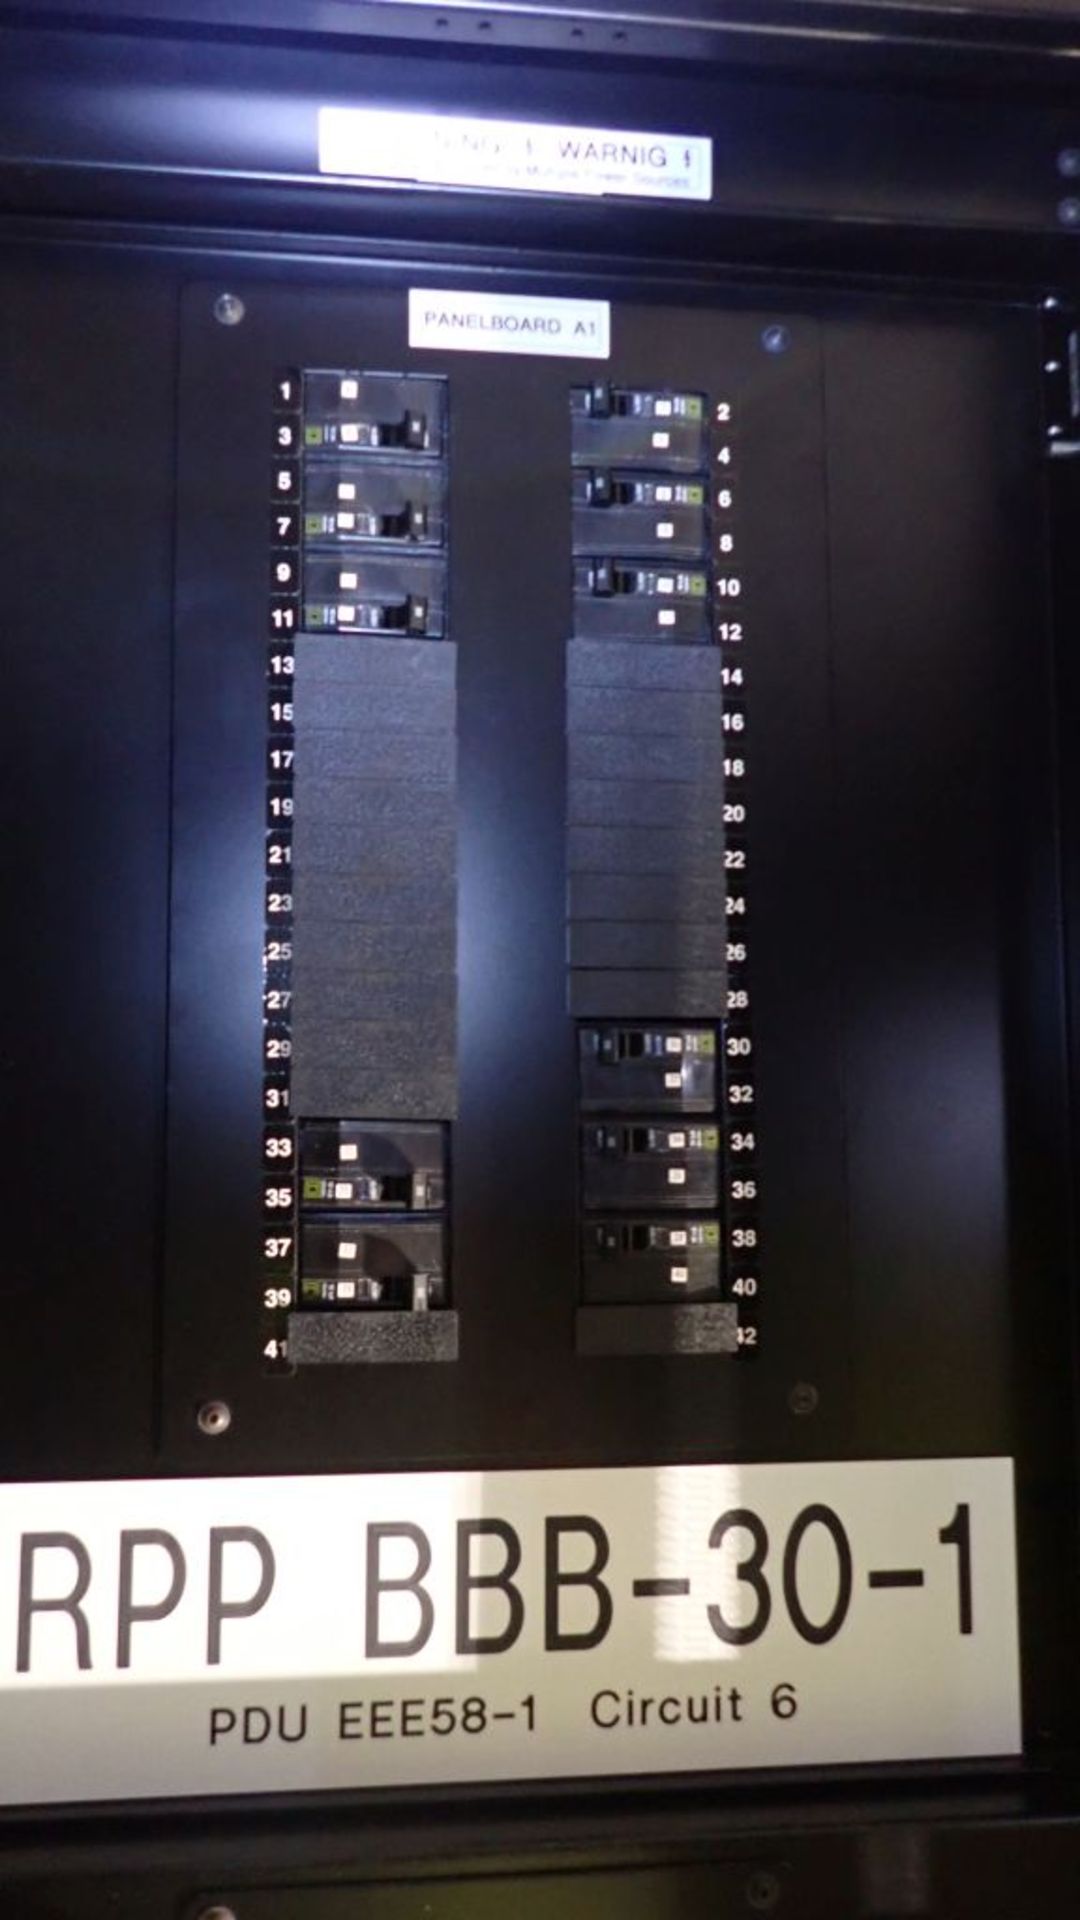 Onyx Power Rack Panelboard | Part No. 98-112-00-00; System 2; Input: 208/120 VAC; 4-Wire Plus Ground - Image 15 of 21